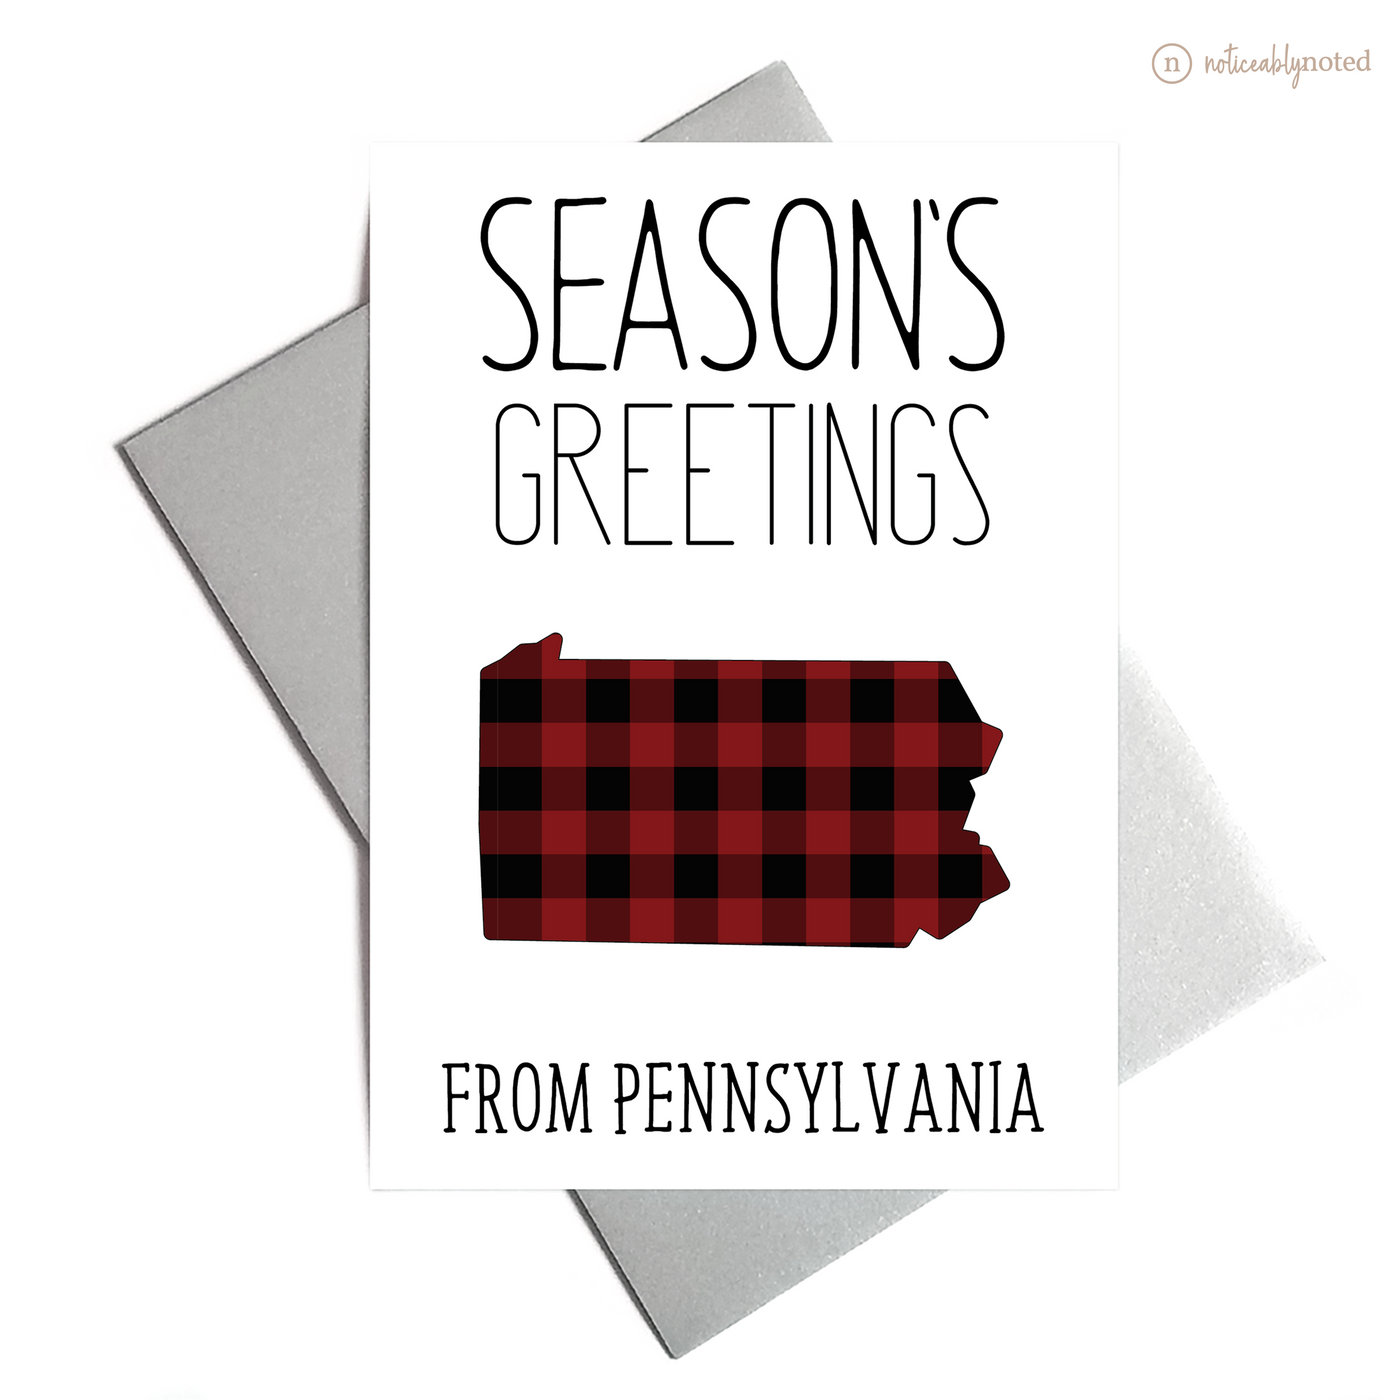 PA Holiday Greeting Cards | Noticeably Noted